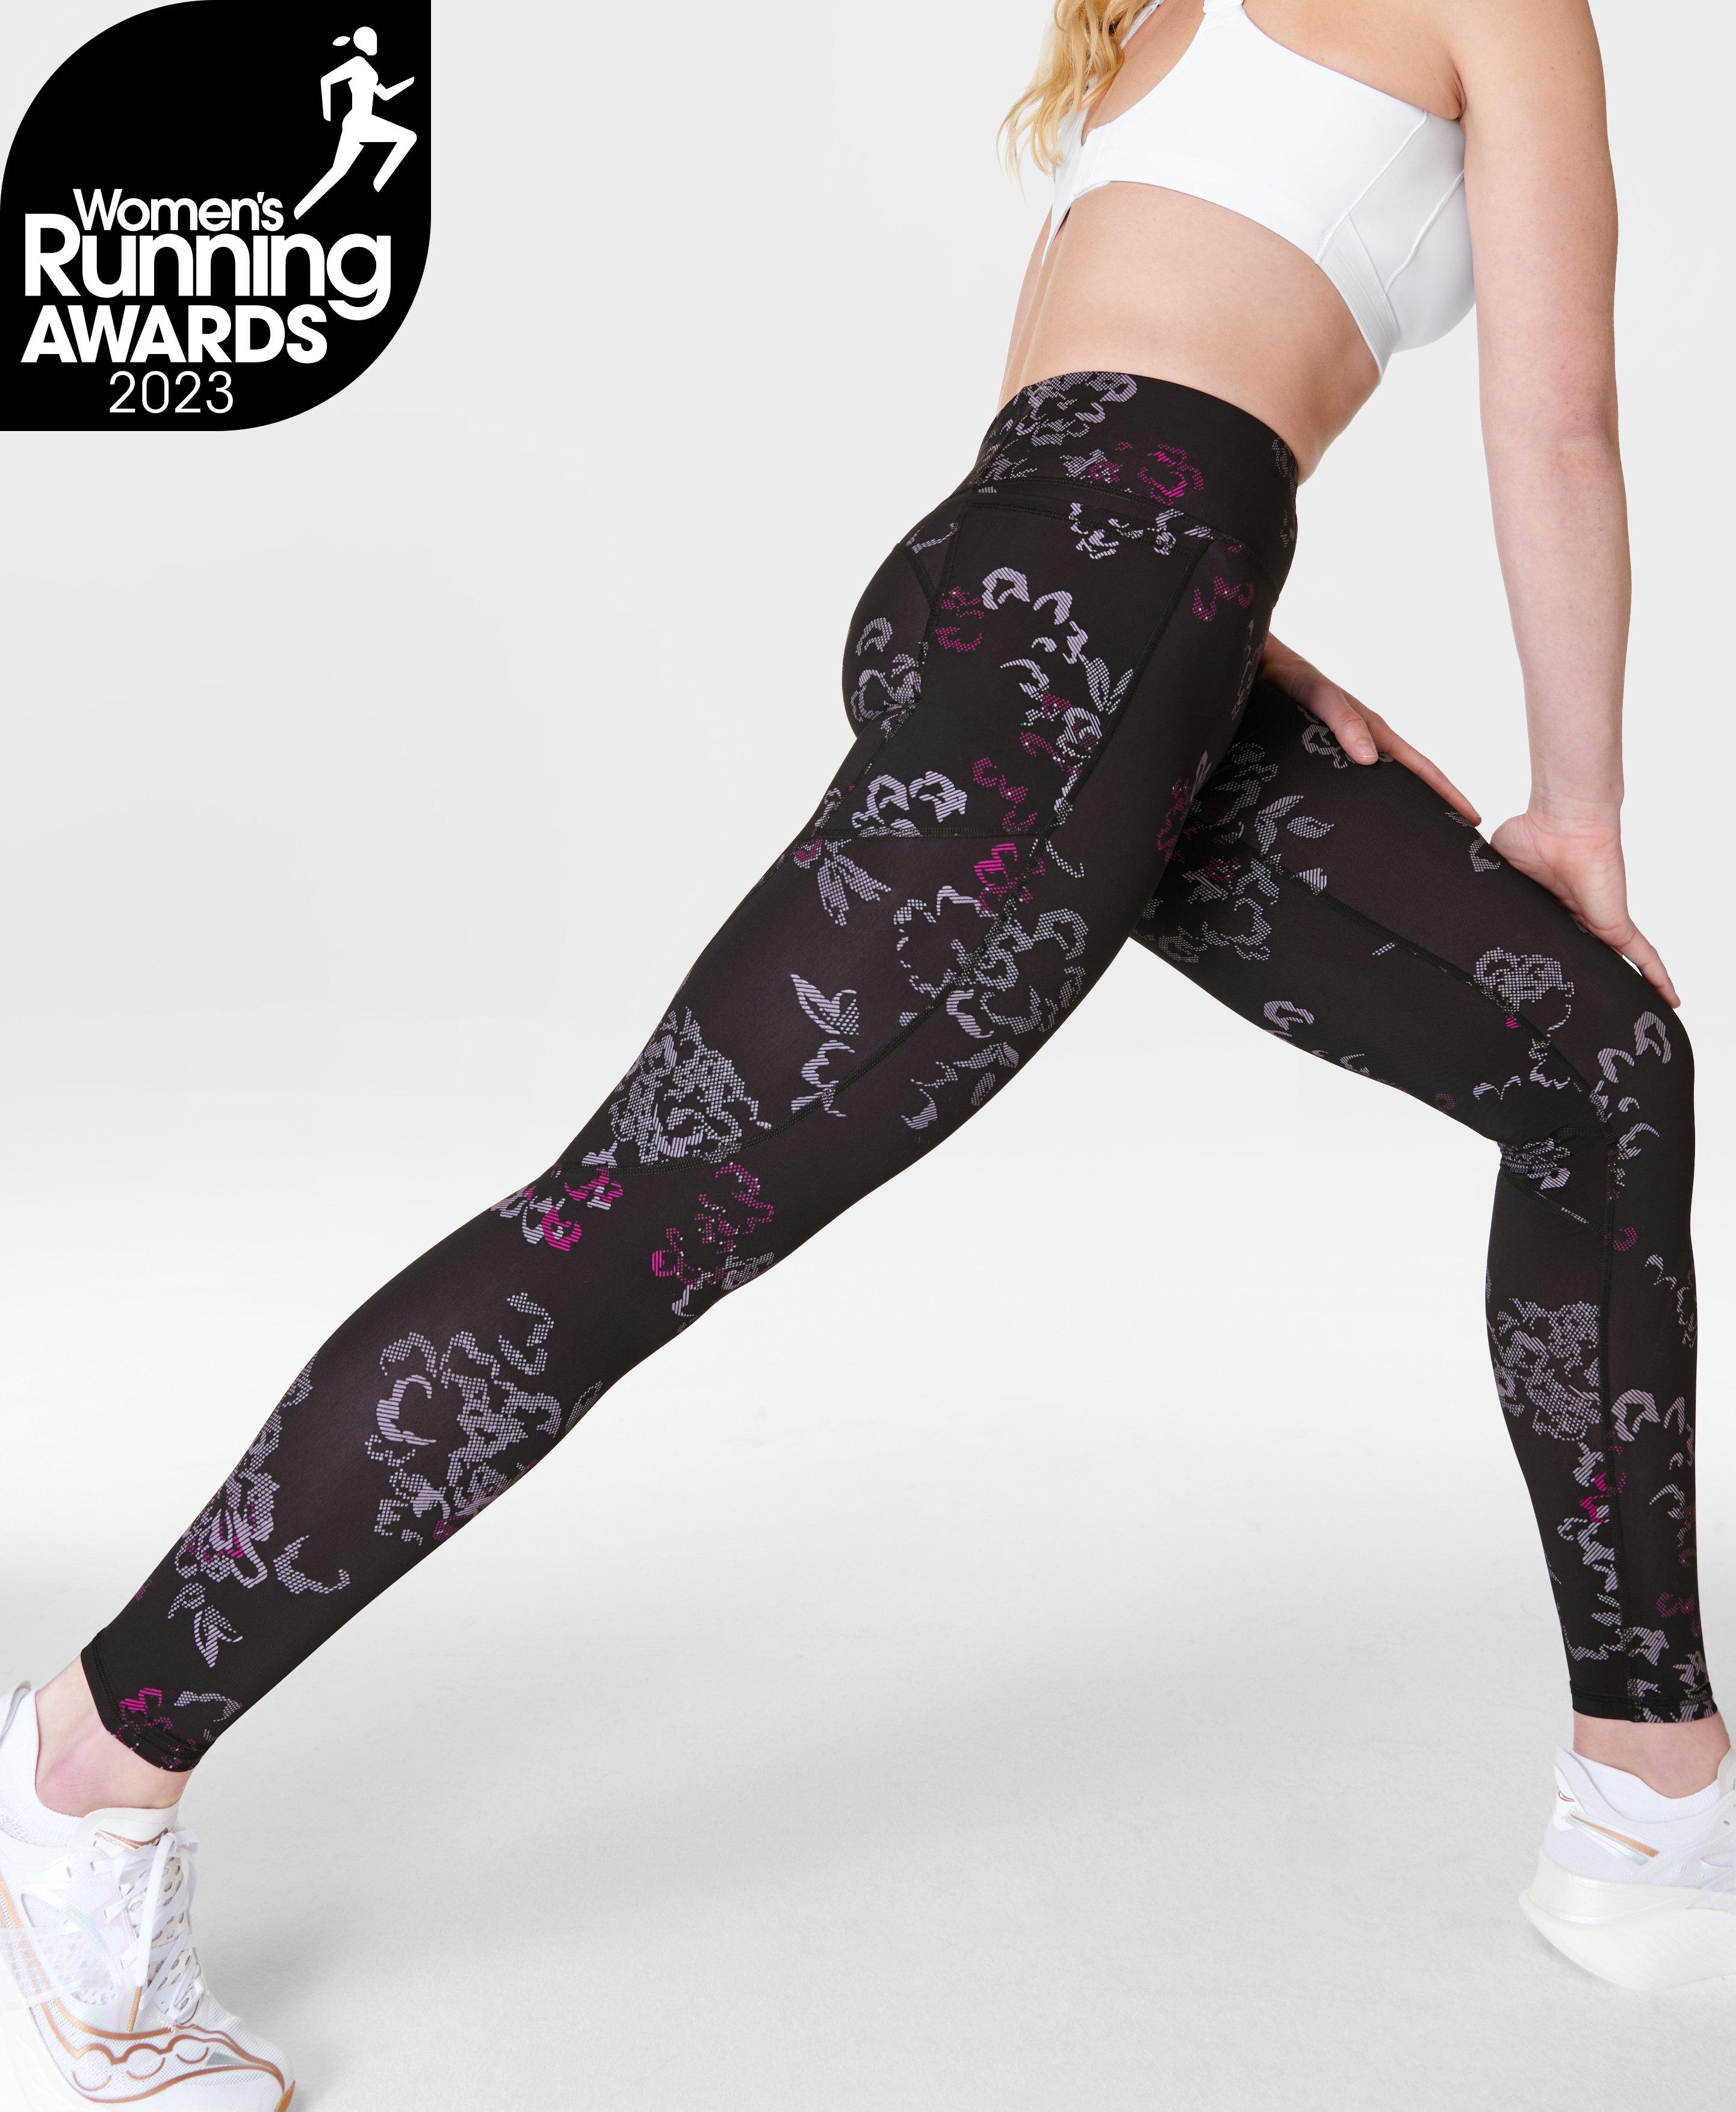 Sweaty Betty All Day floral full length print grey leggings Size XS - $45 -  From Rebecca